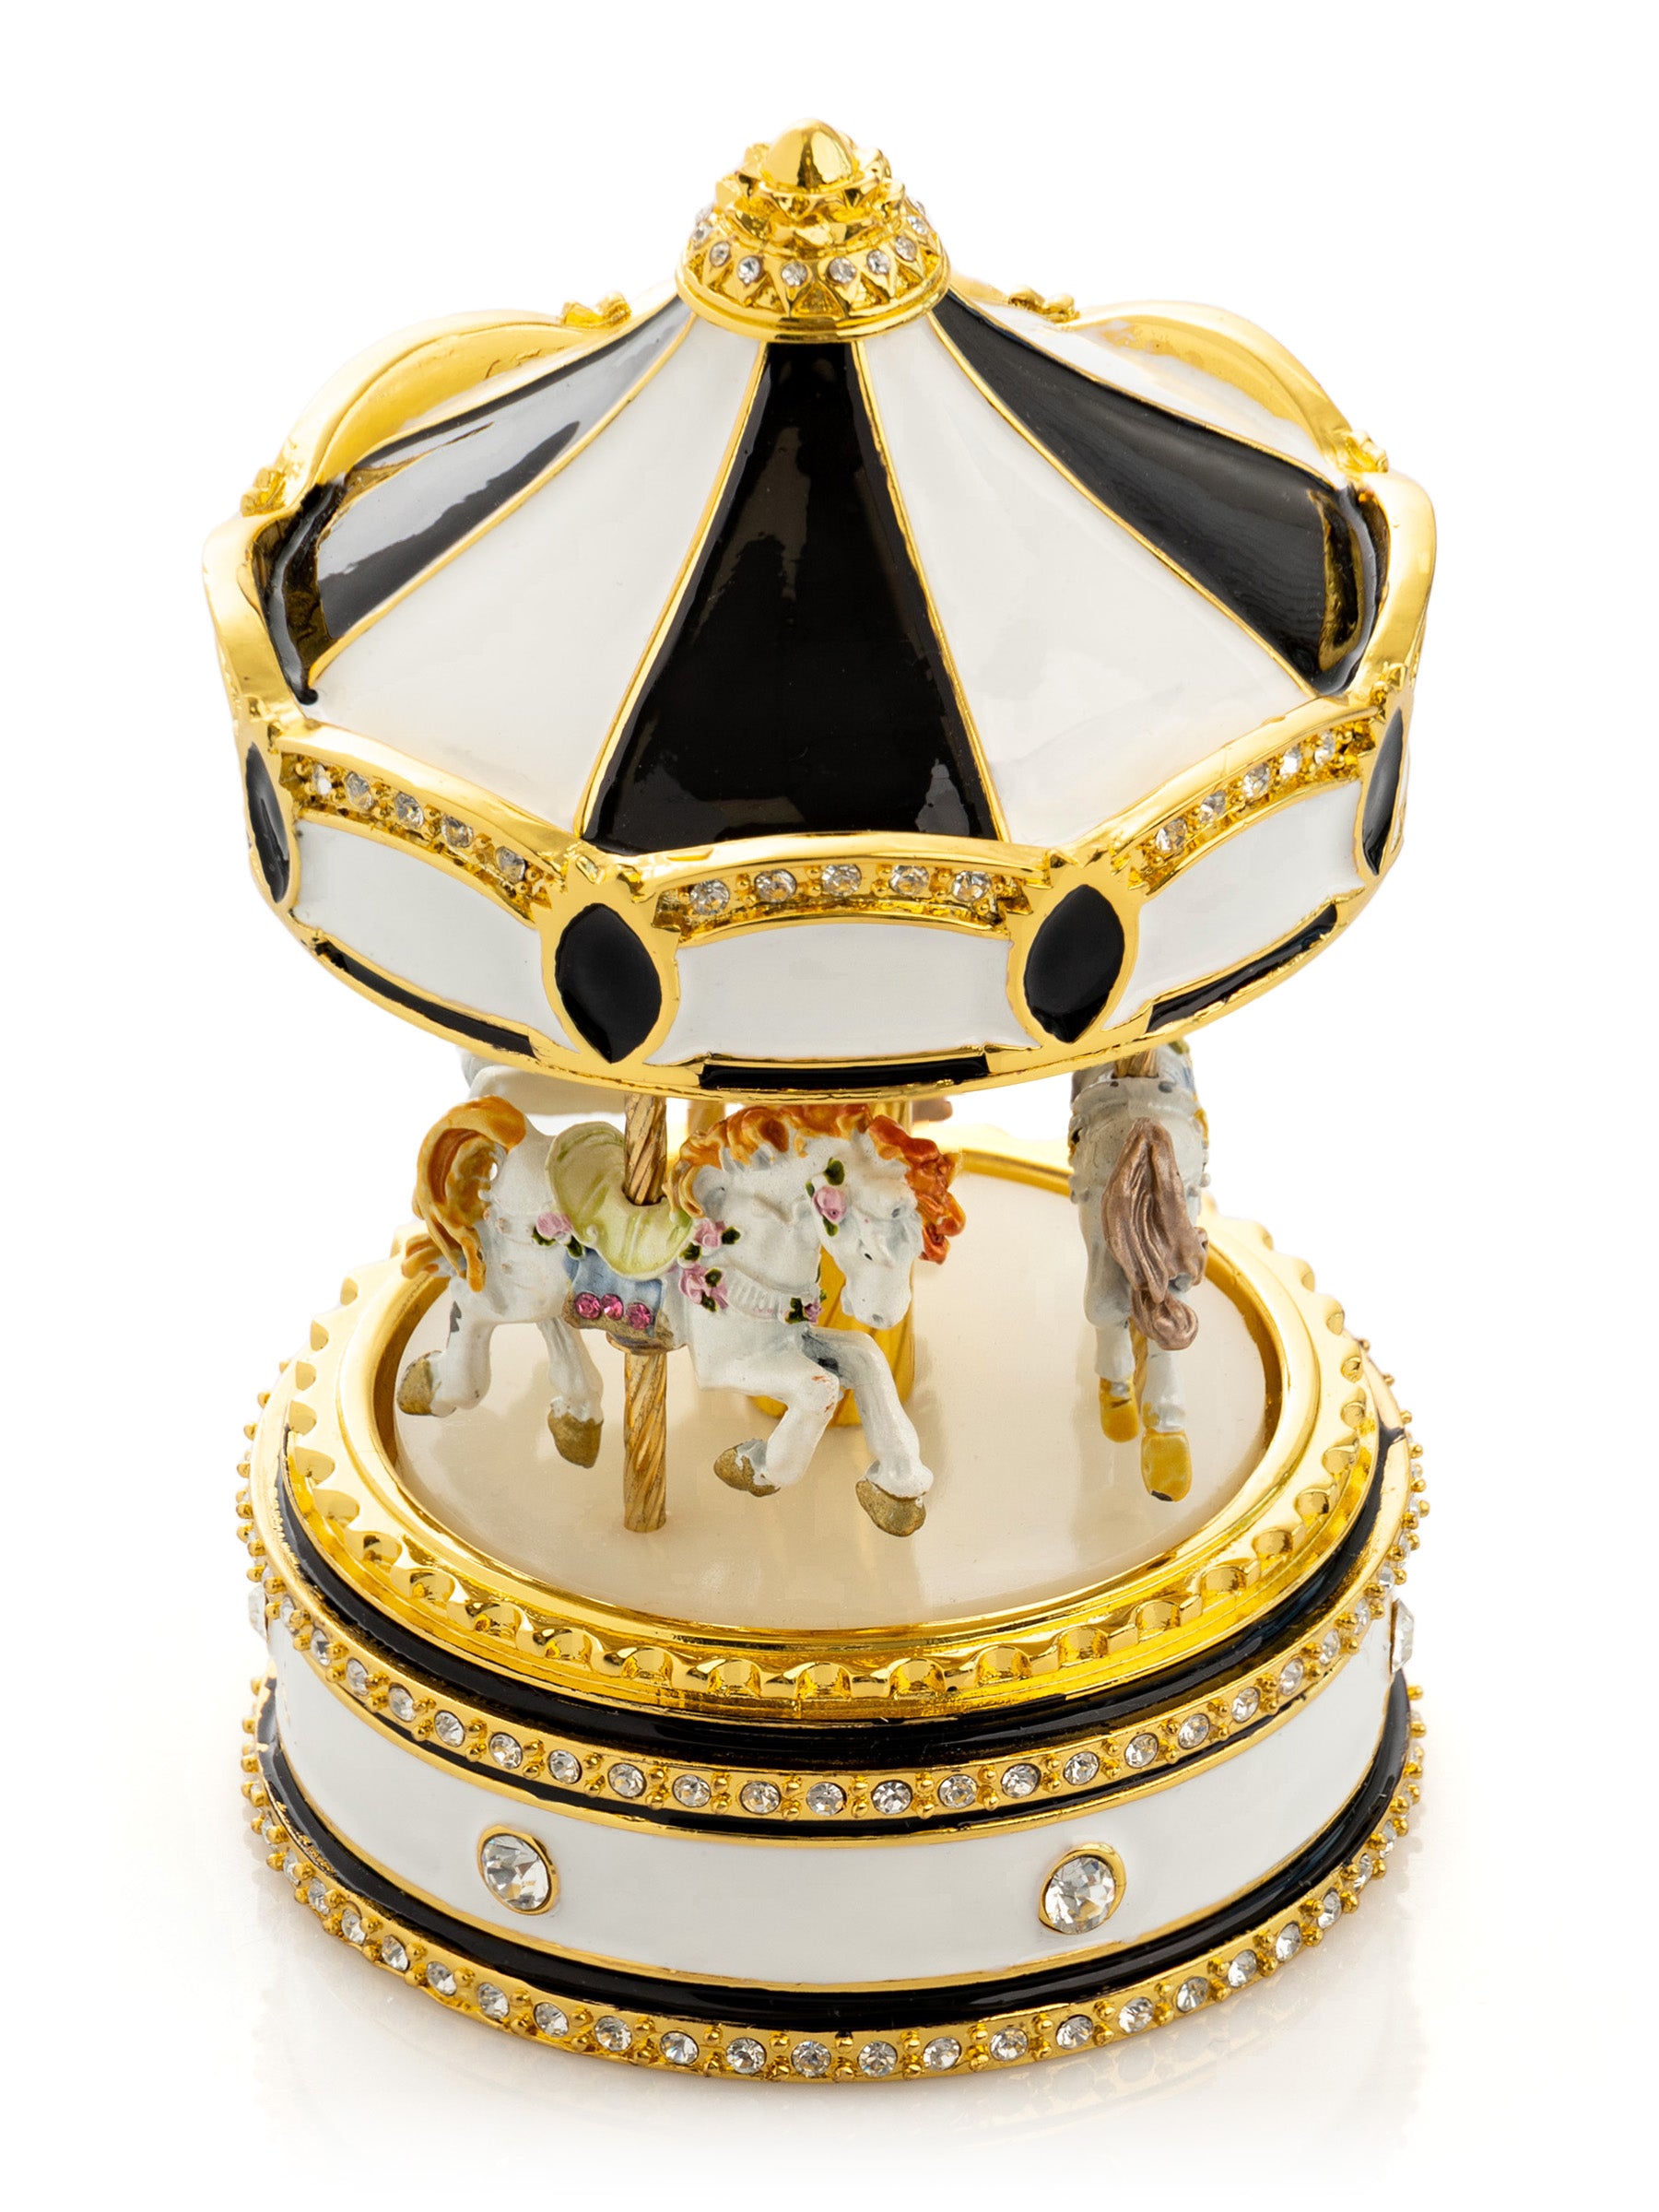 Black Musical Carousel with Spinning Royal Horses